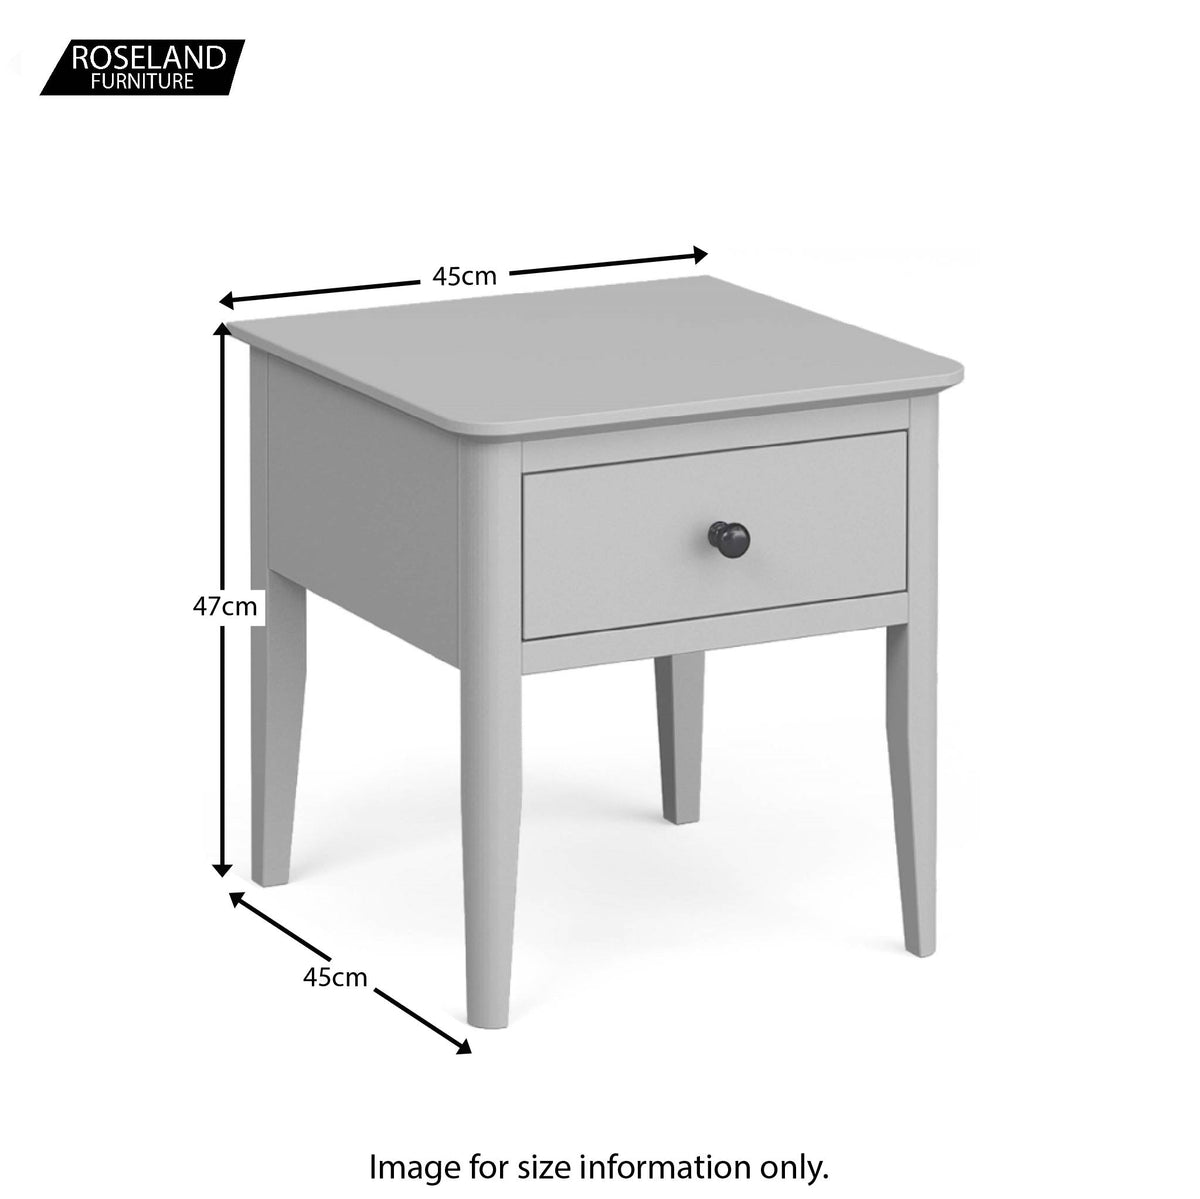 Elgin Grey Side Lamp Table size guide